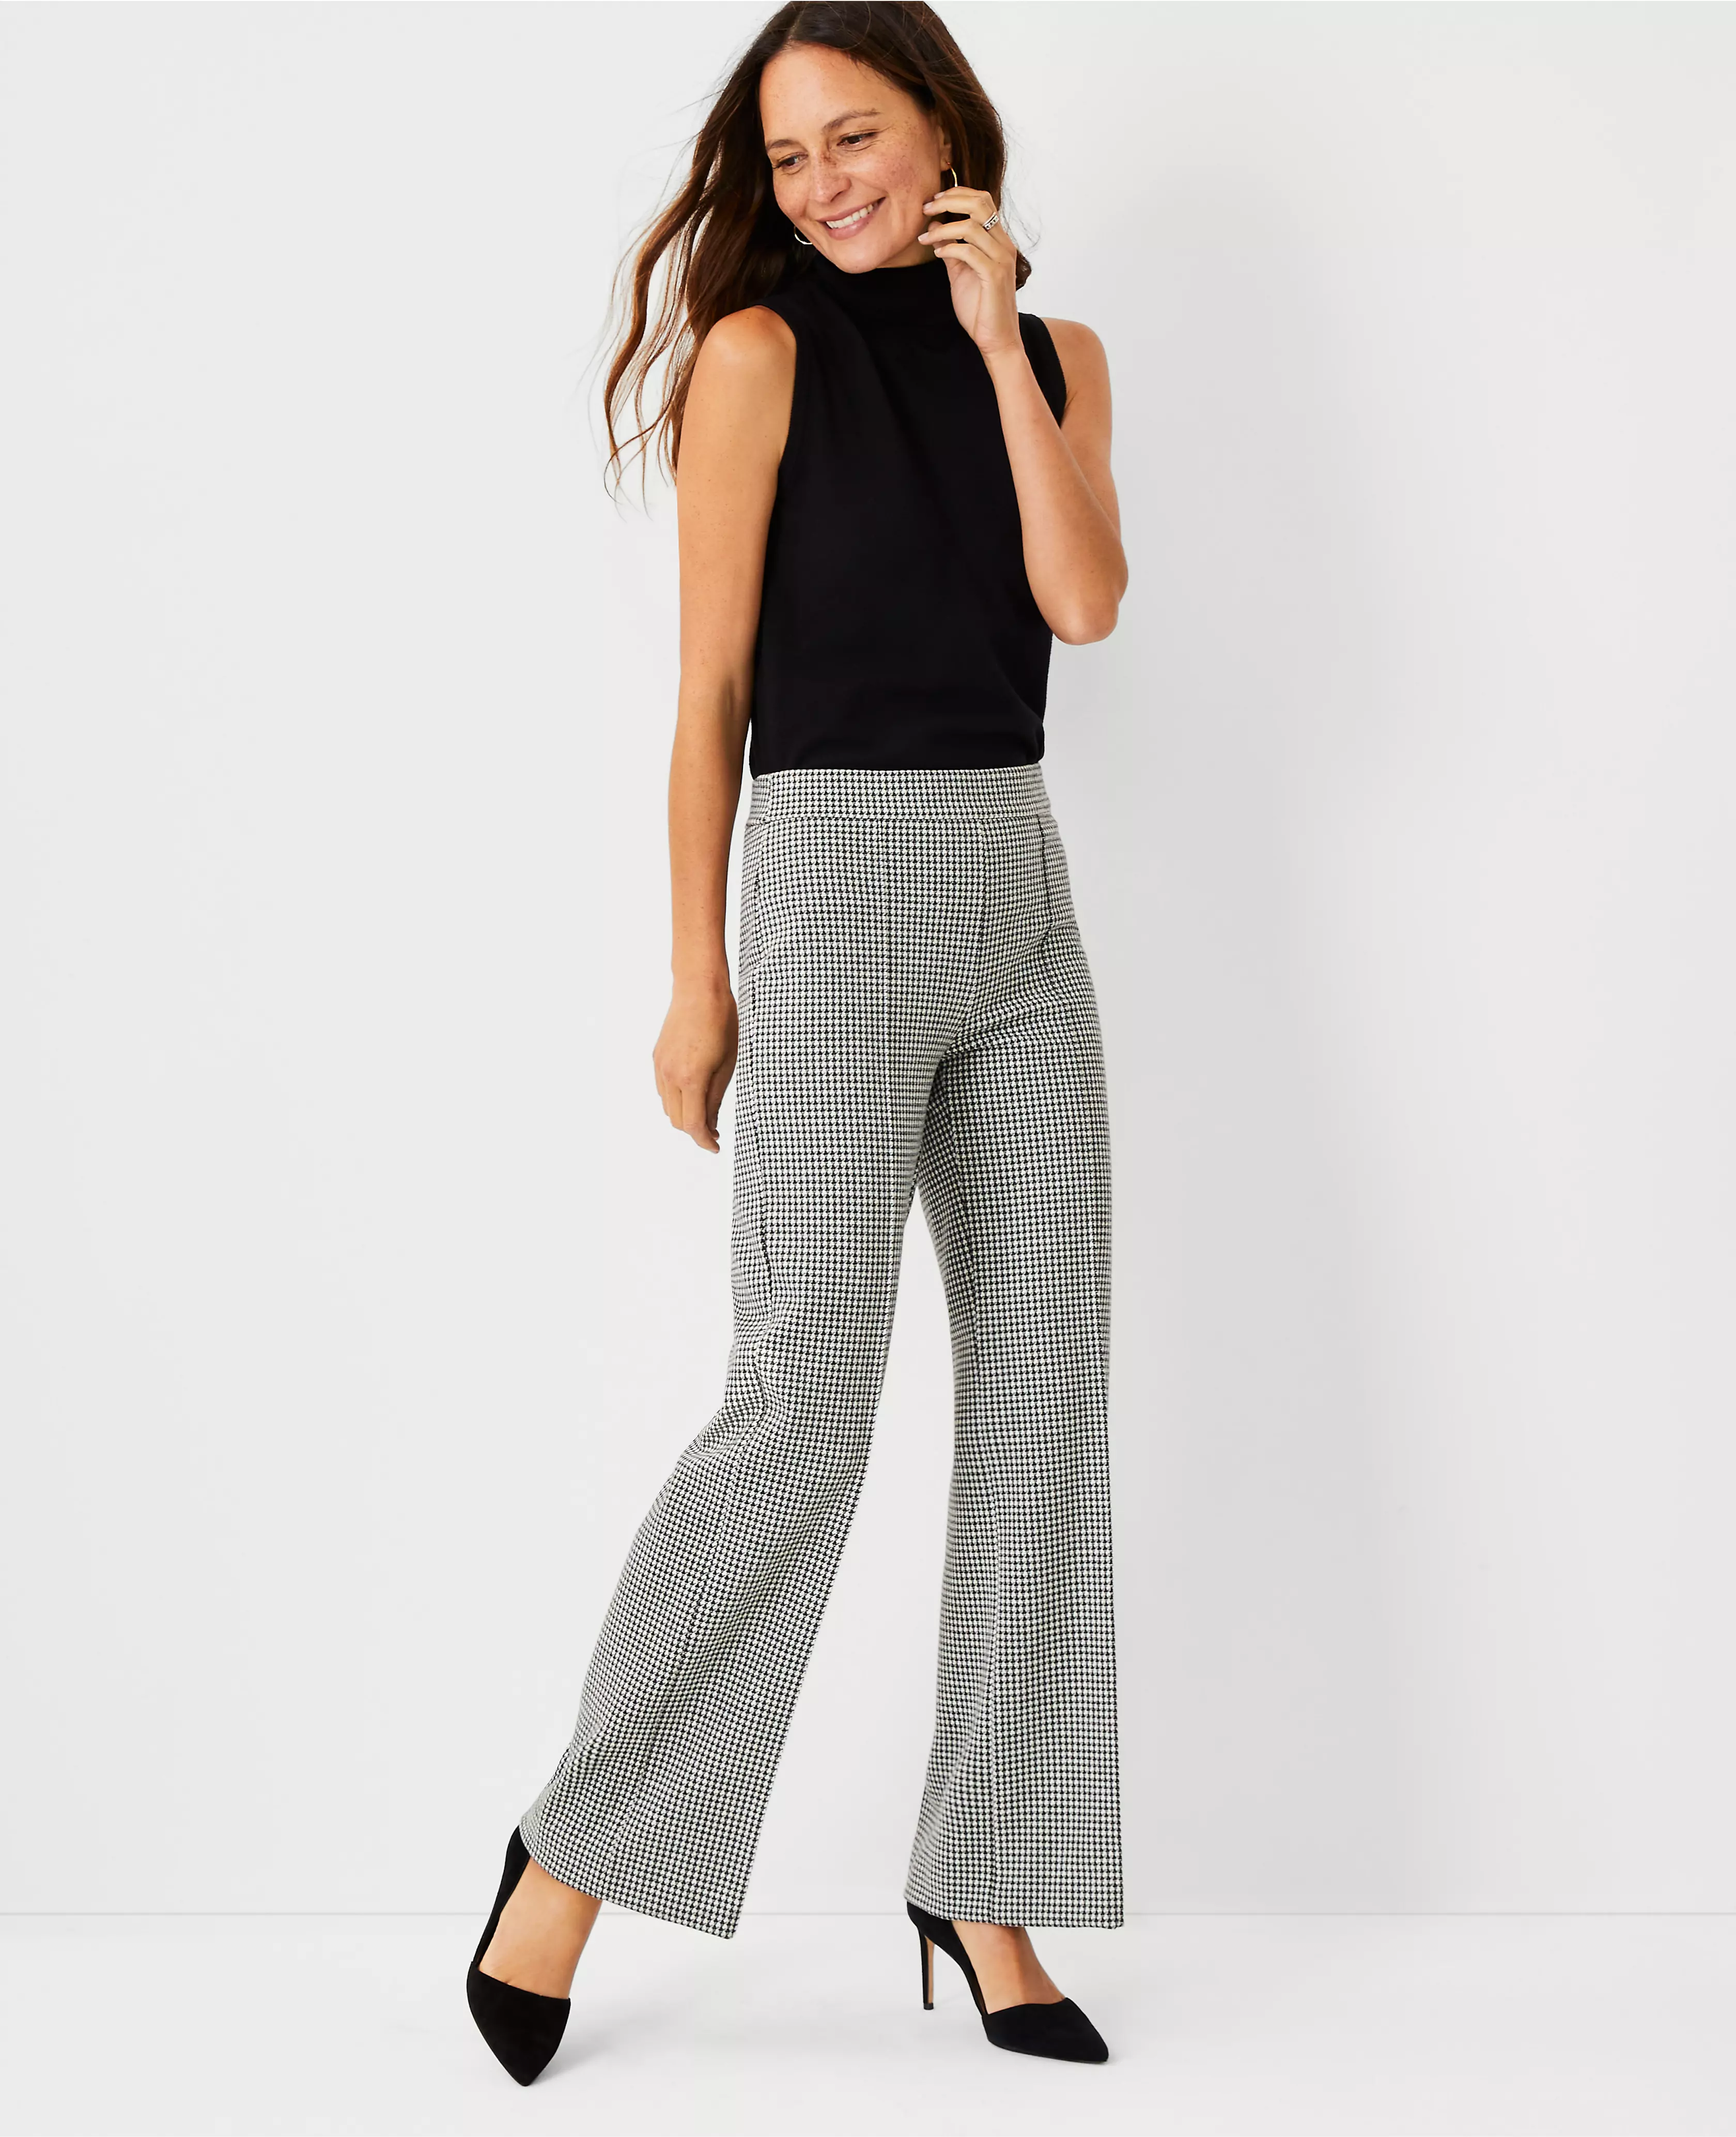 The Houndstooth Side Zip Straight Pant